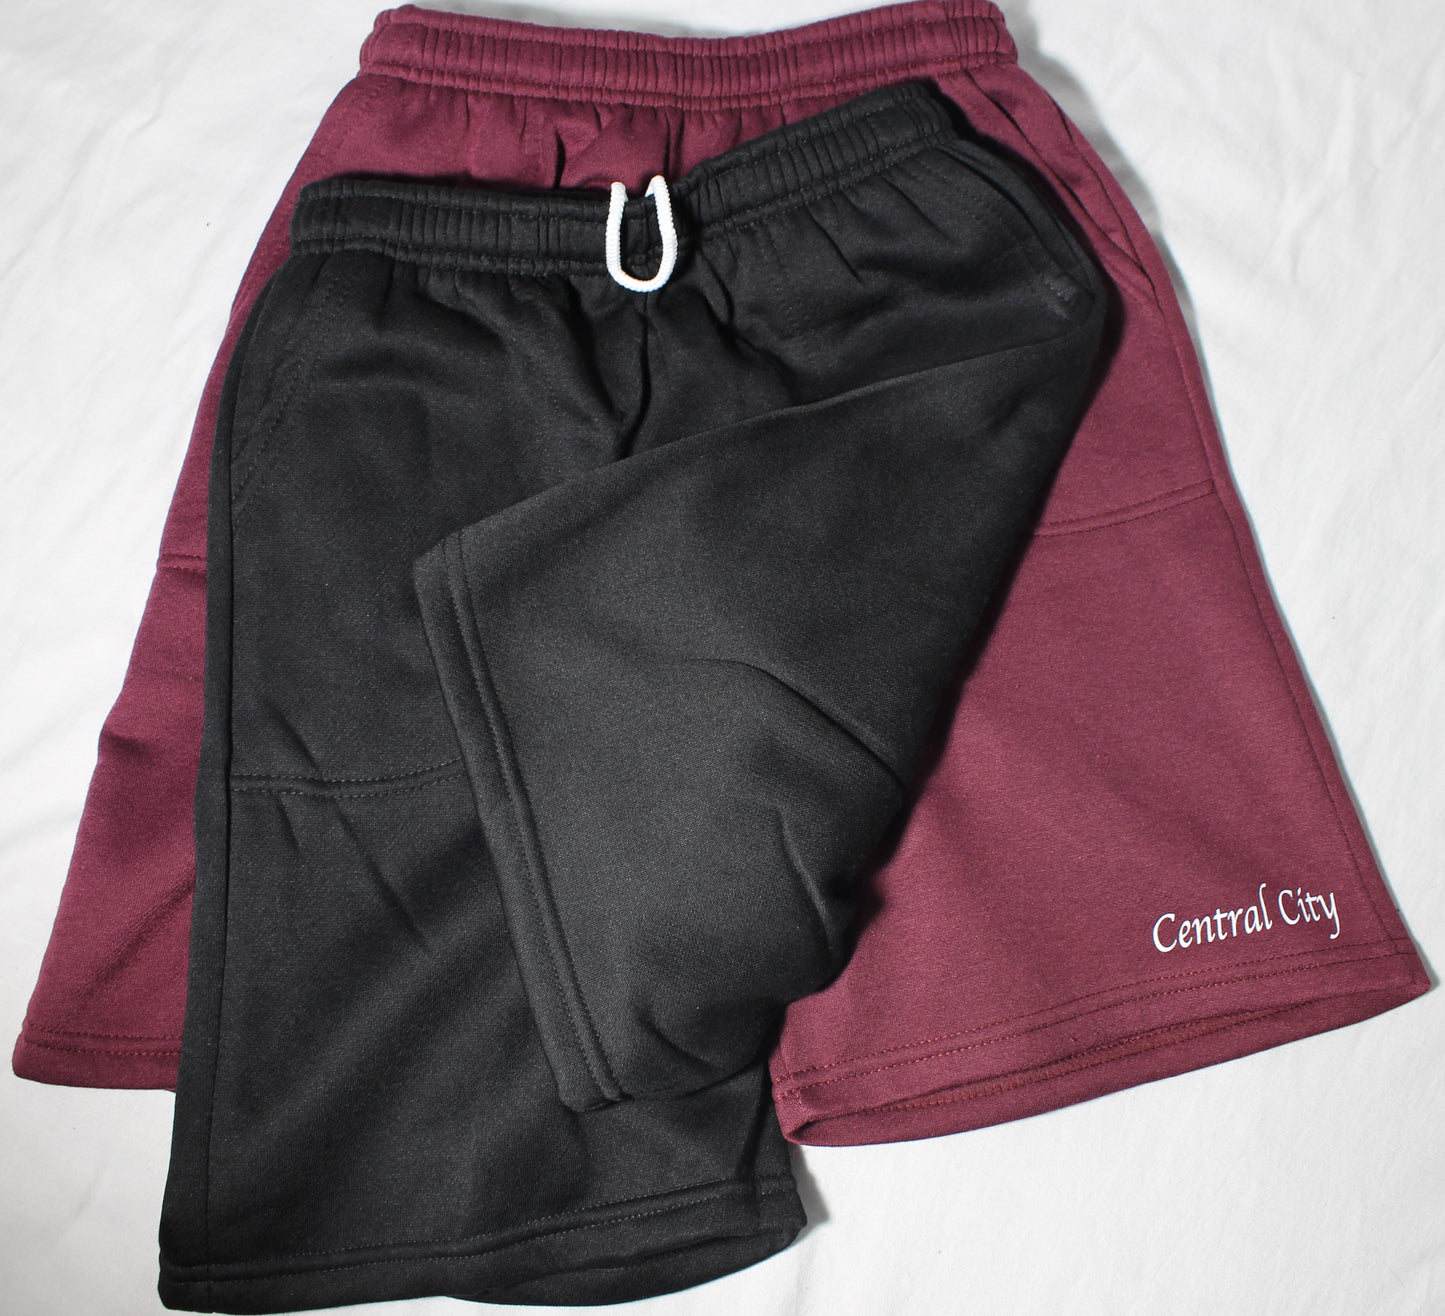 Central City Shorts